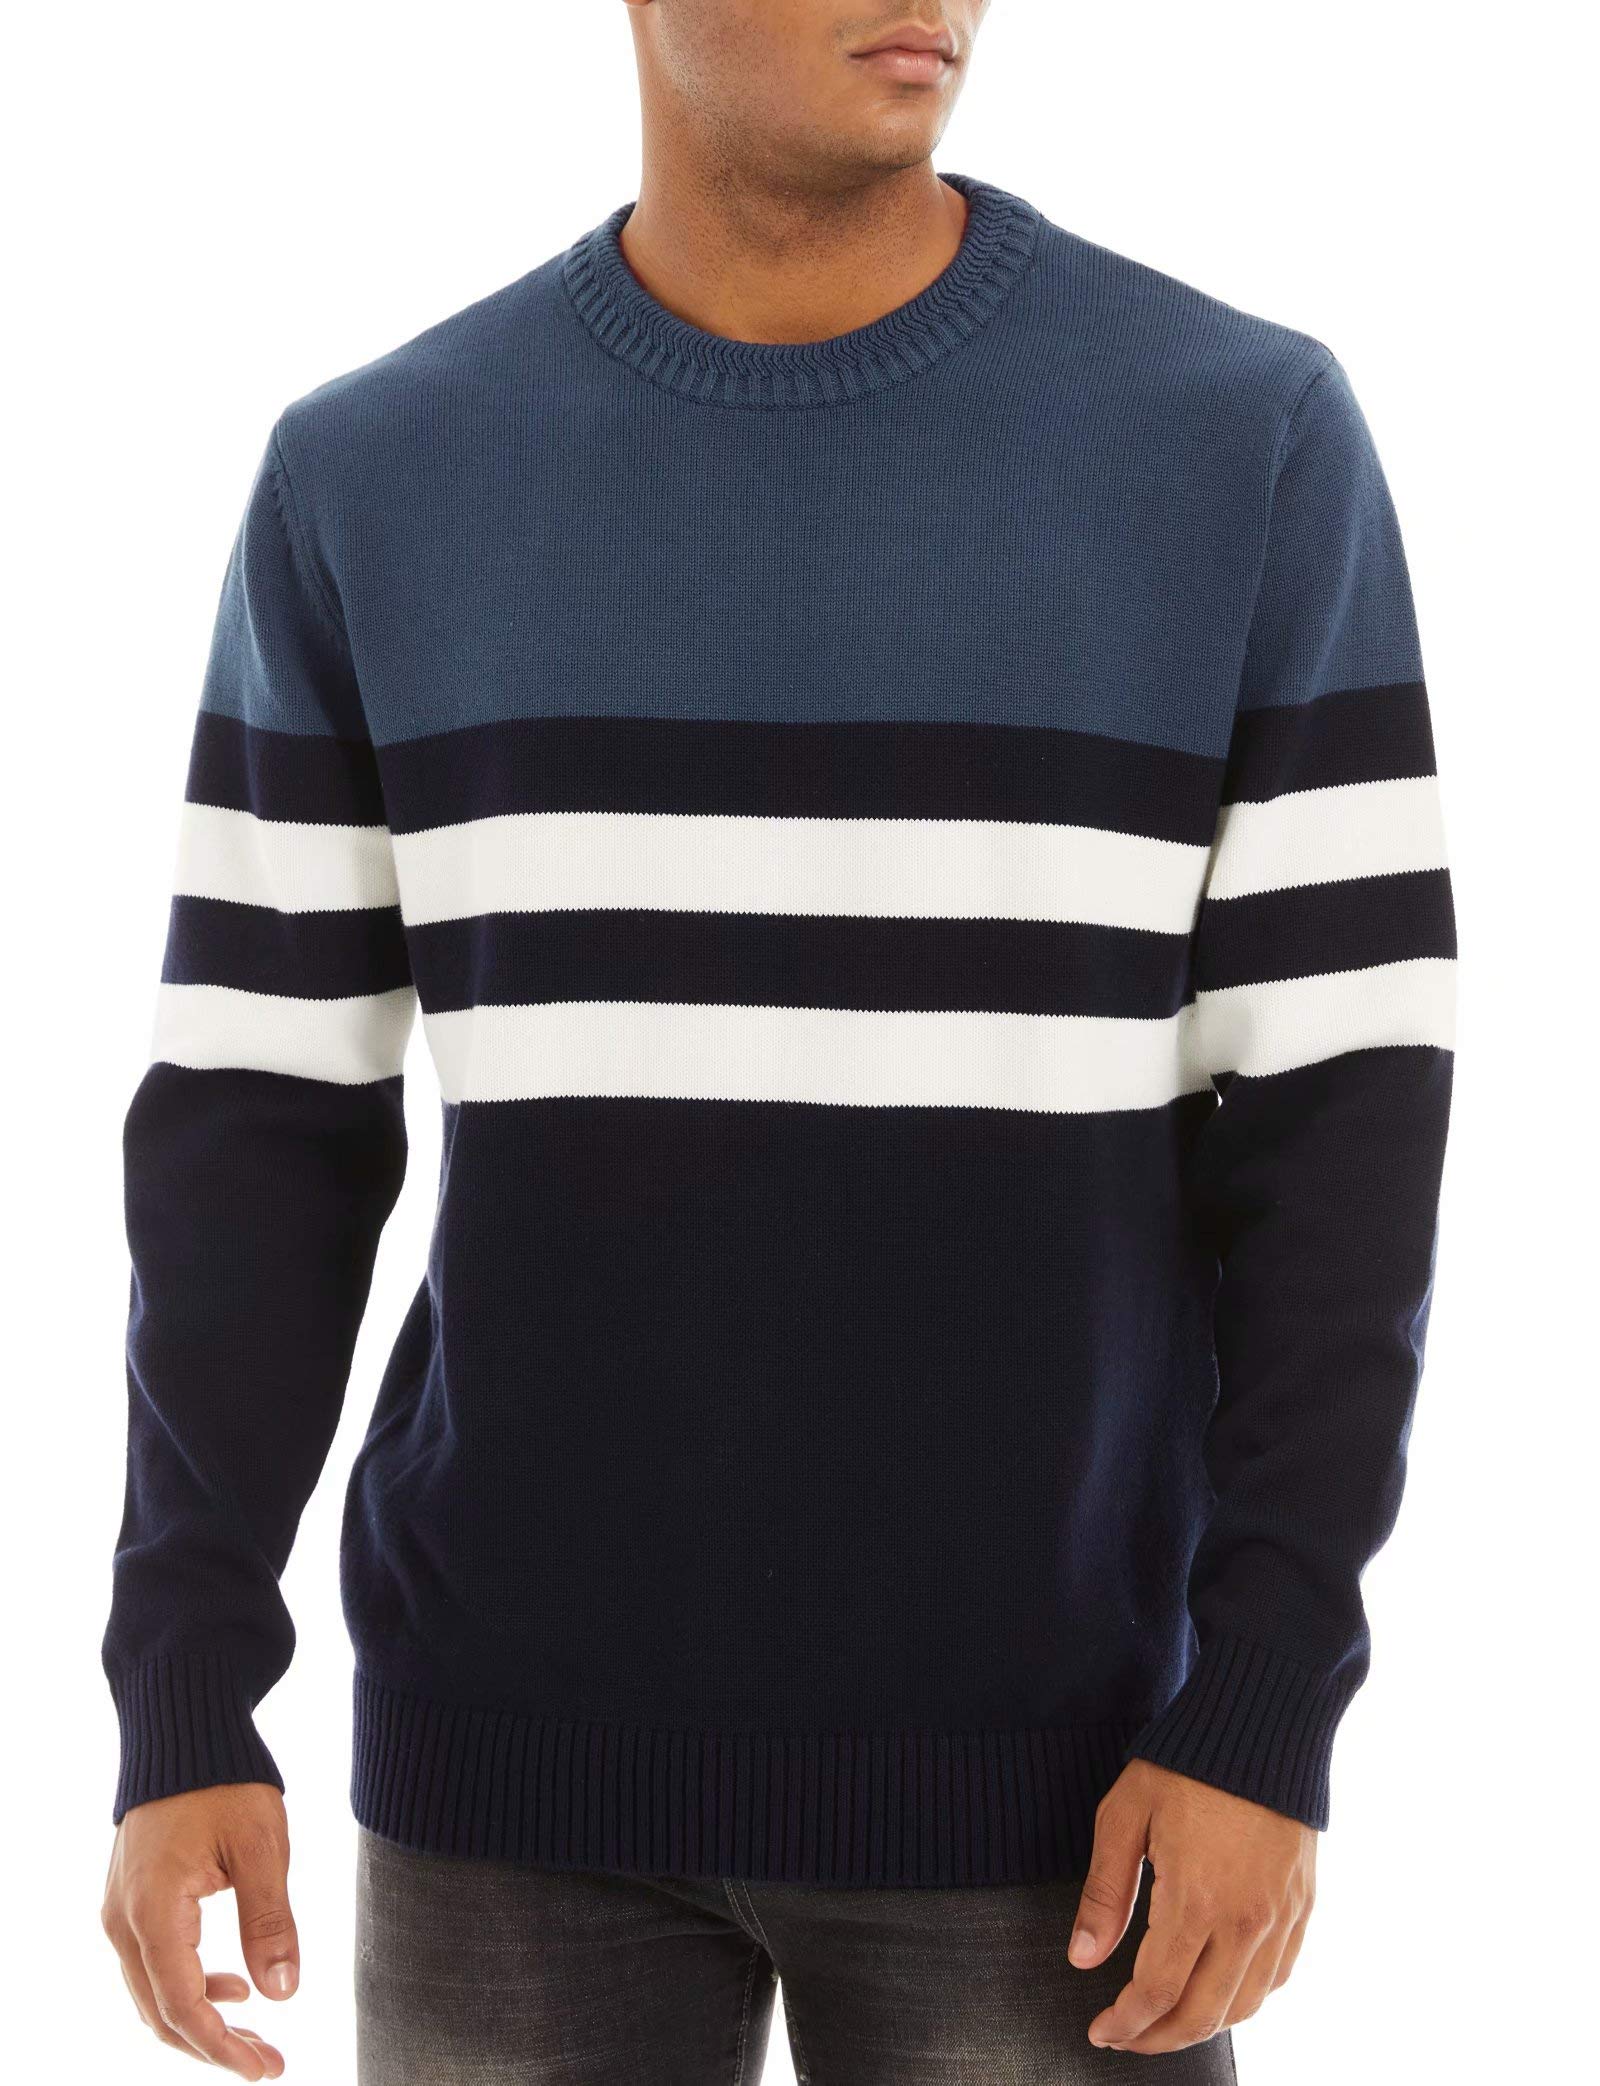 MAGCOMSEN Men's Crewneck Sweater Soft Thermal Knitted Sweatshirt Color Block Striped